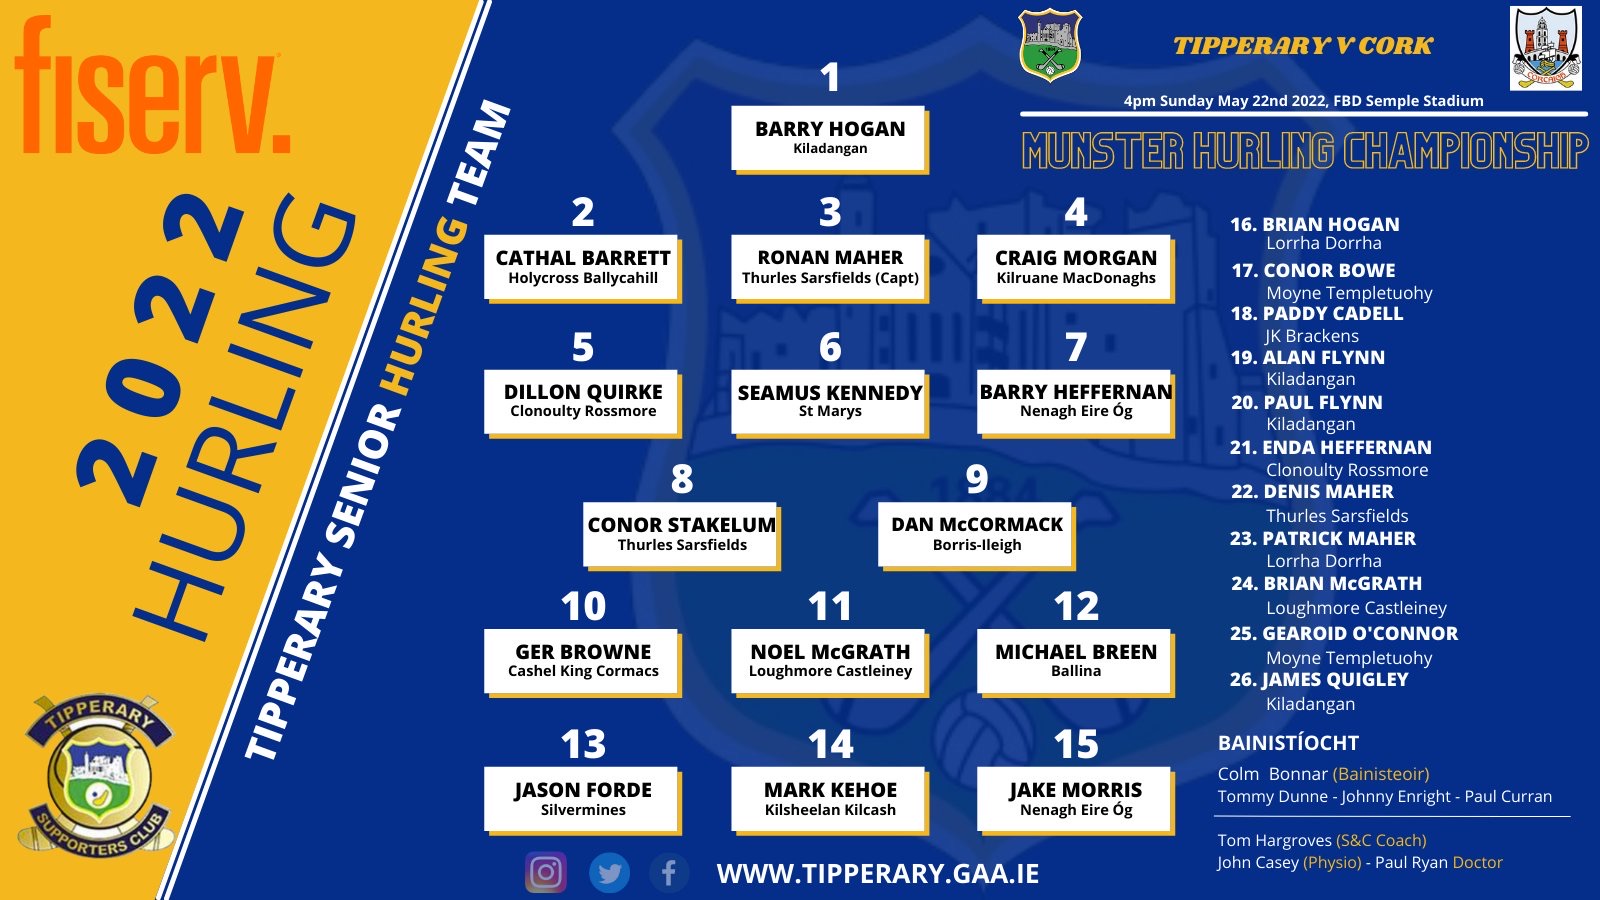 Photo from Tipperary supporters club on Twitter.